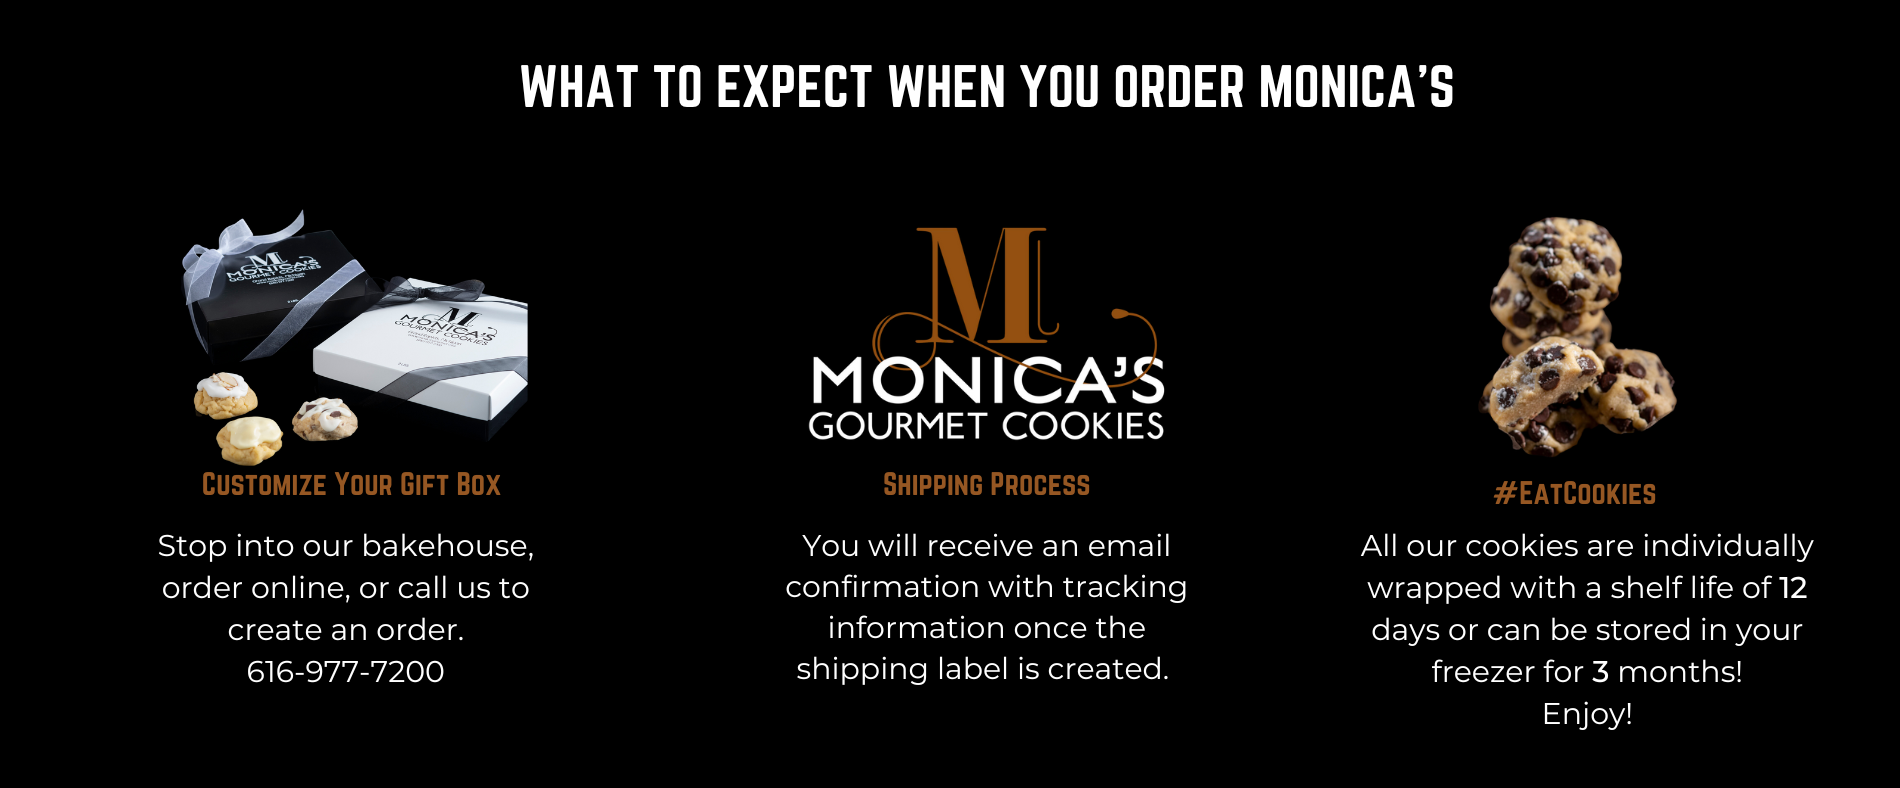 The process of what you can expect when you order Monica's Gourmet Cookies.